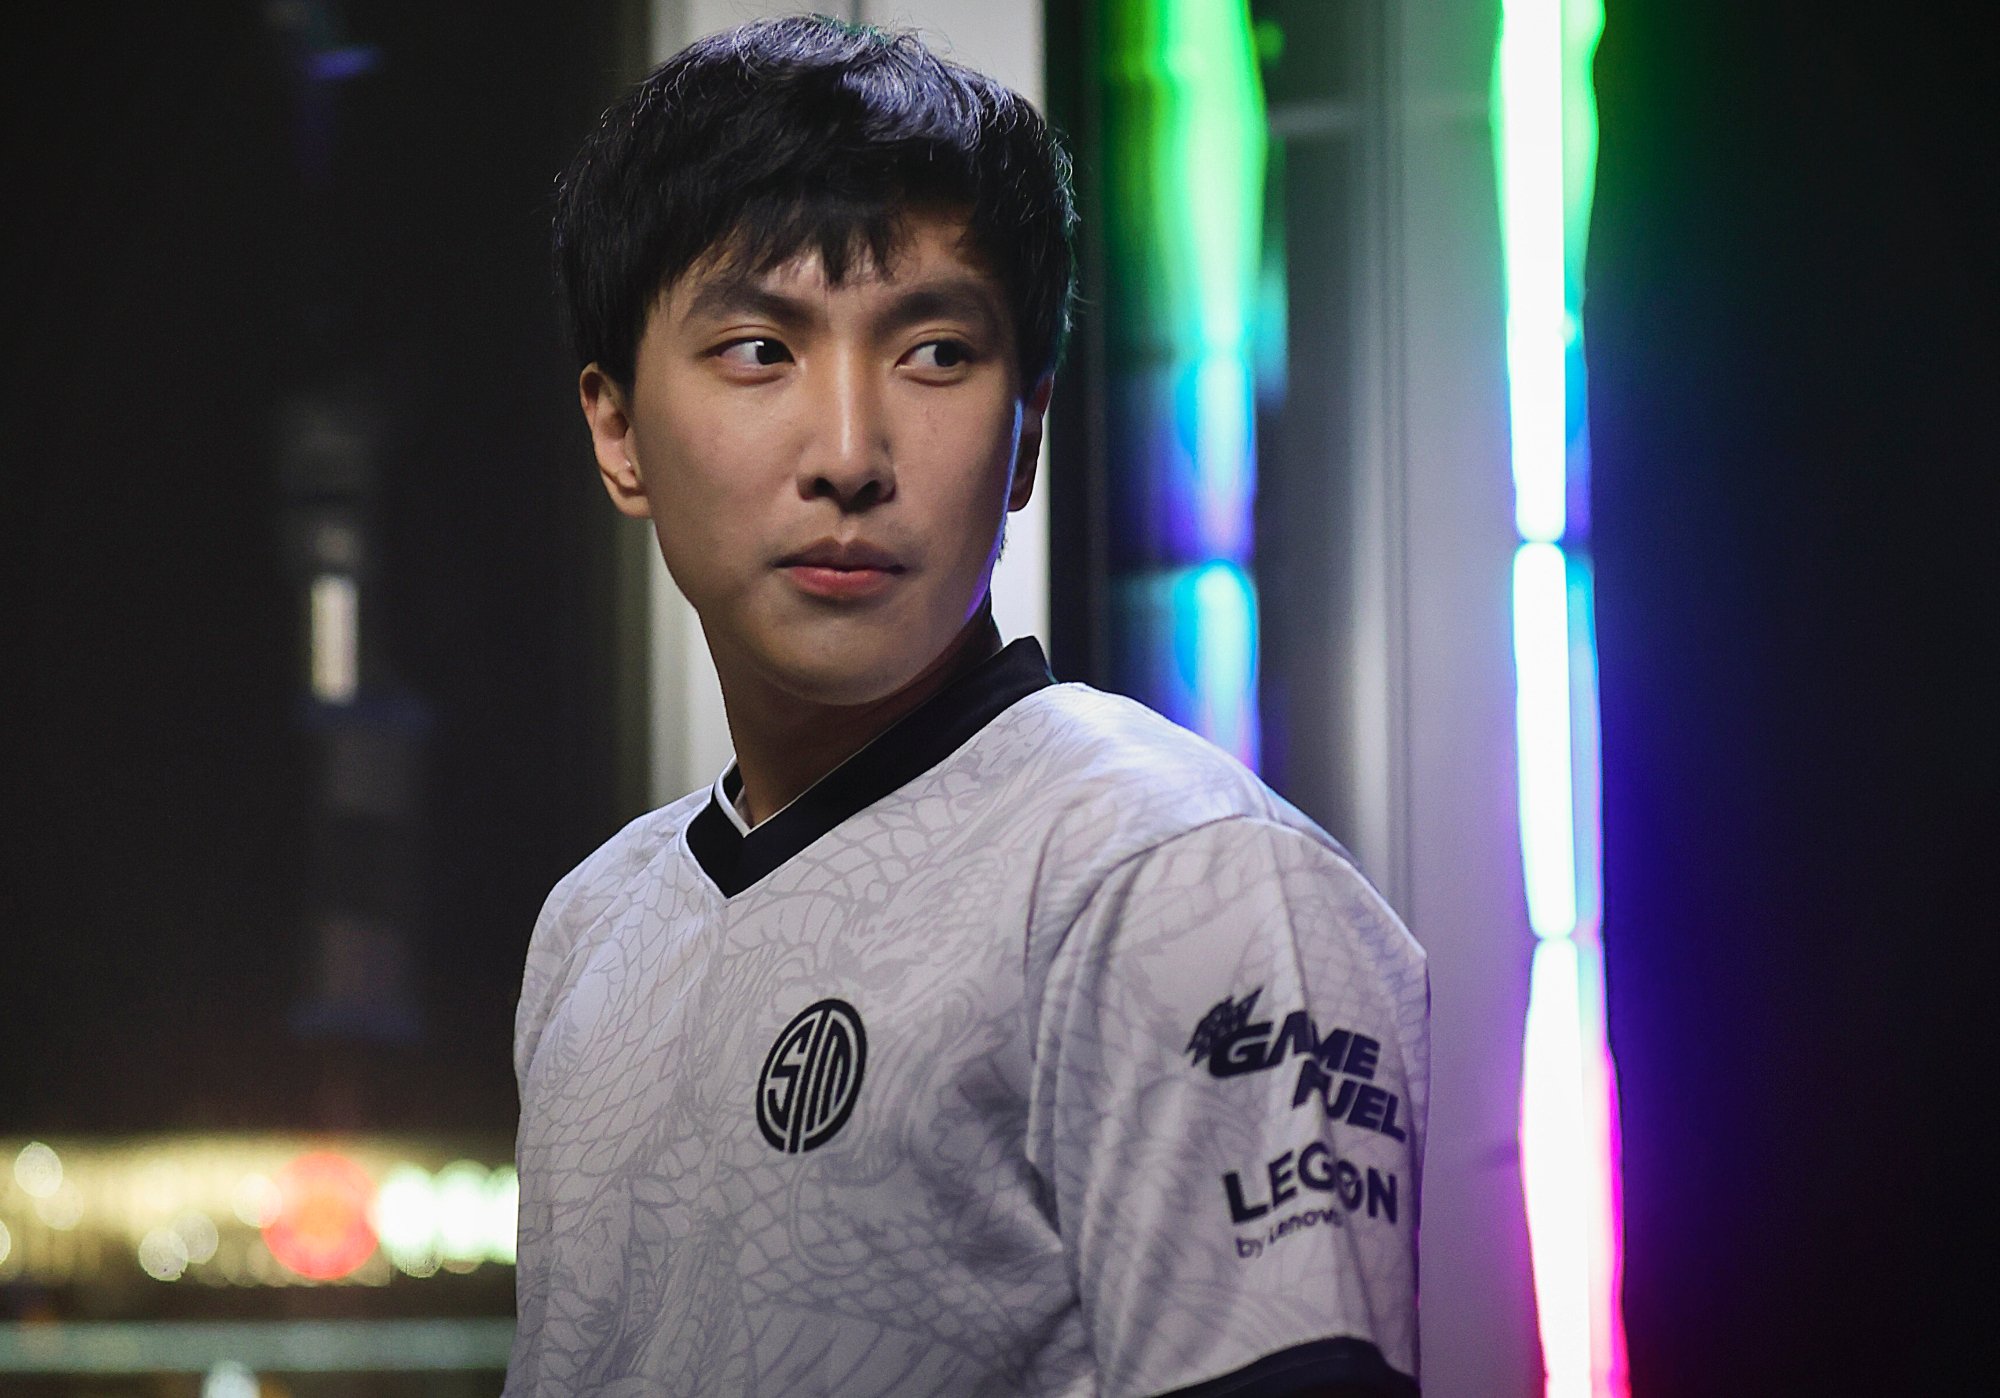 Ex-TSM League of Legends pro player Doublelift, who played under CEO Reginald. He's wearing the TSM jersey and looking to the side in front of neon lights.